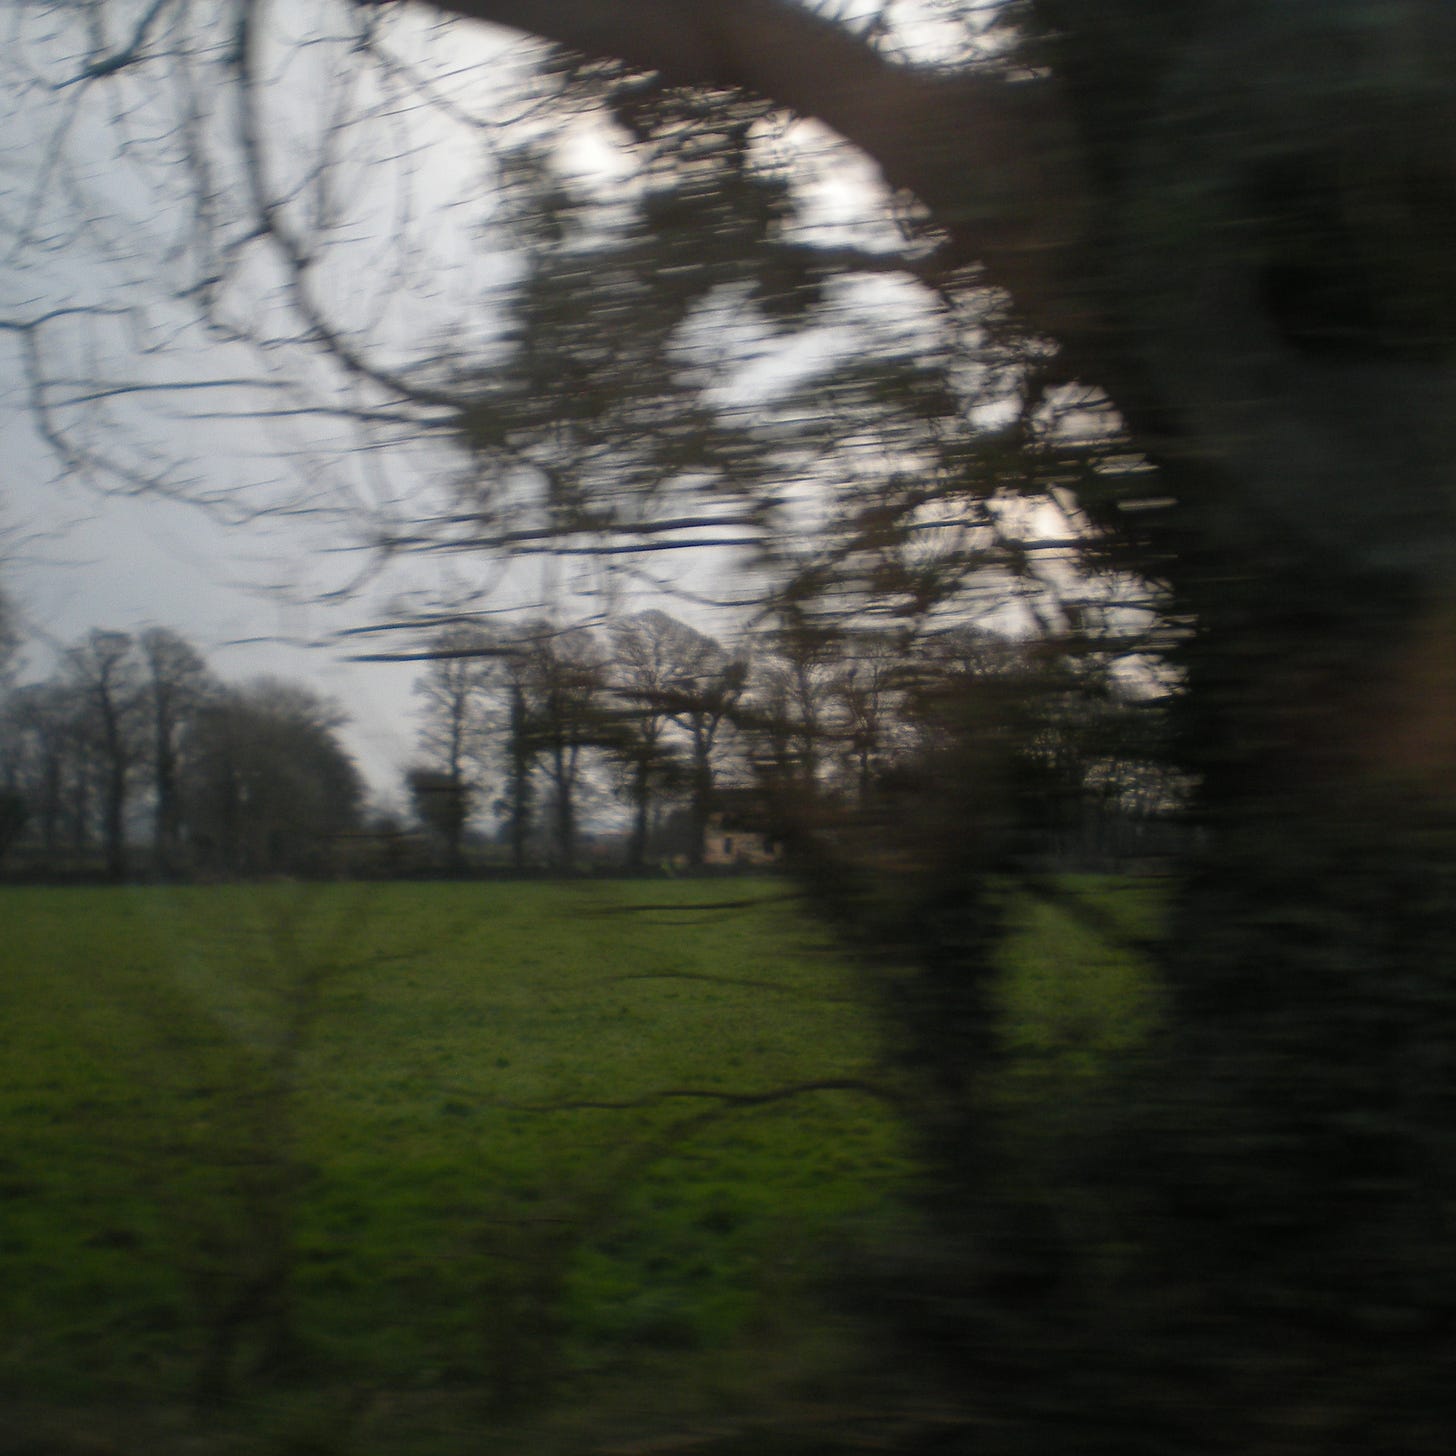 Blurry image of bare trees and a pasture under a gray sky.